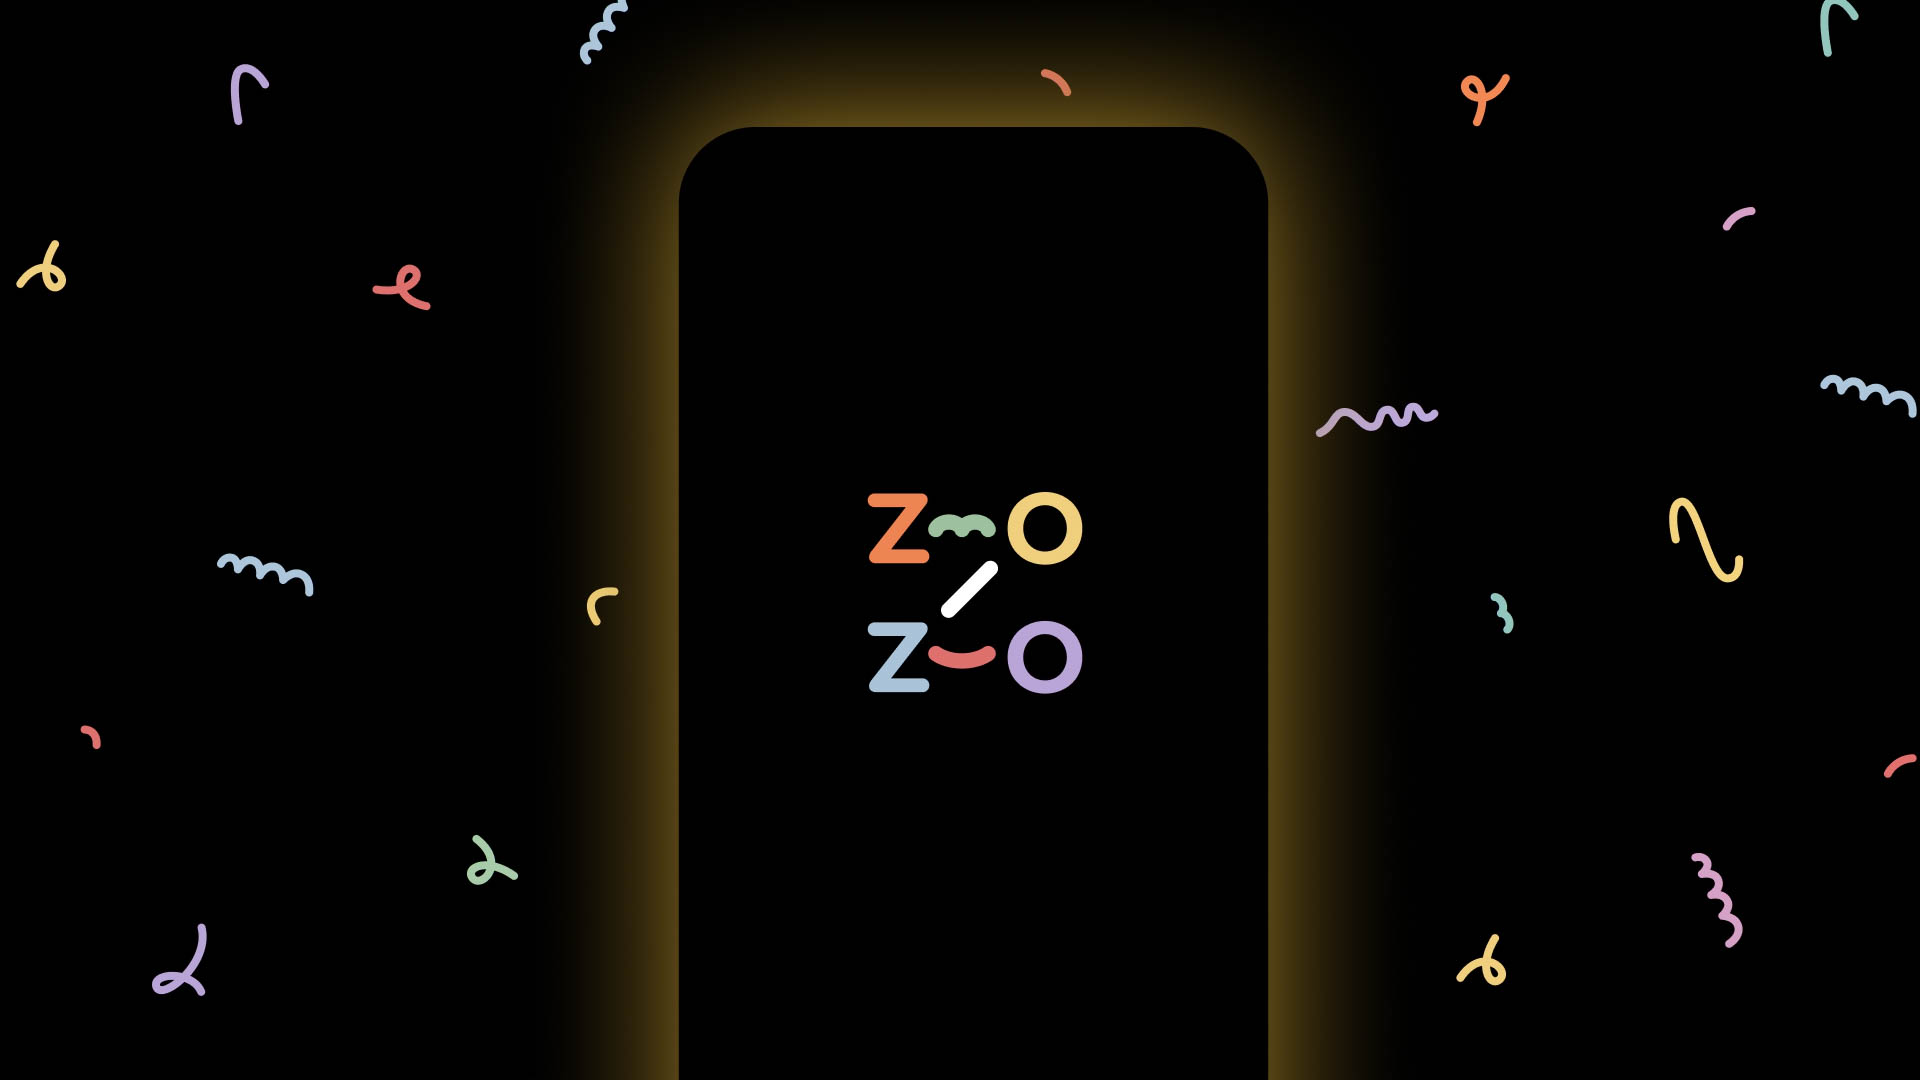 one iphone screen with Zozo written on it